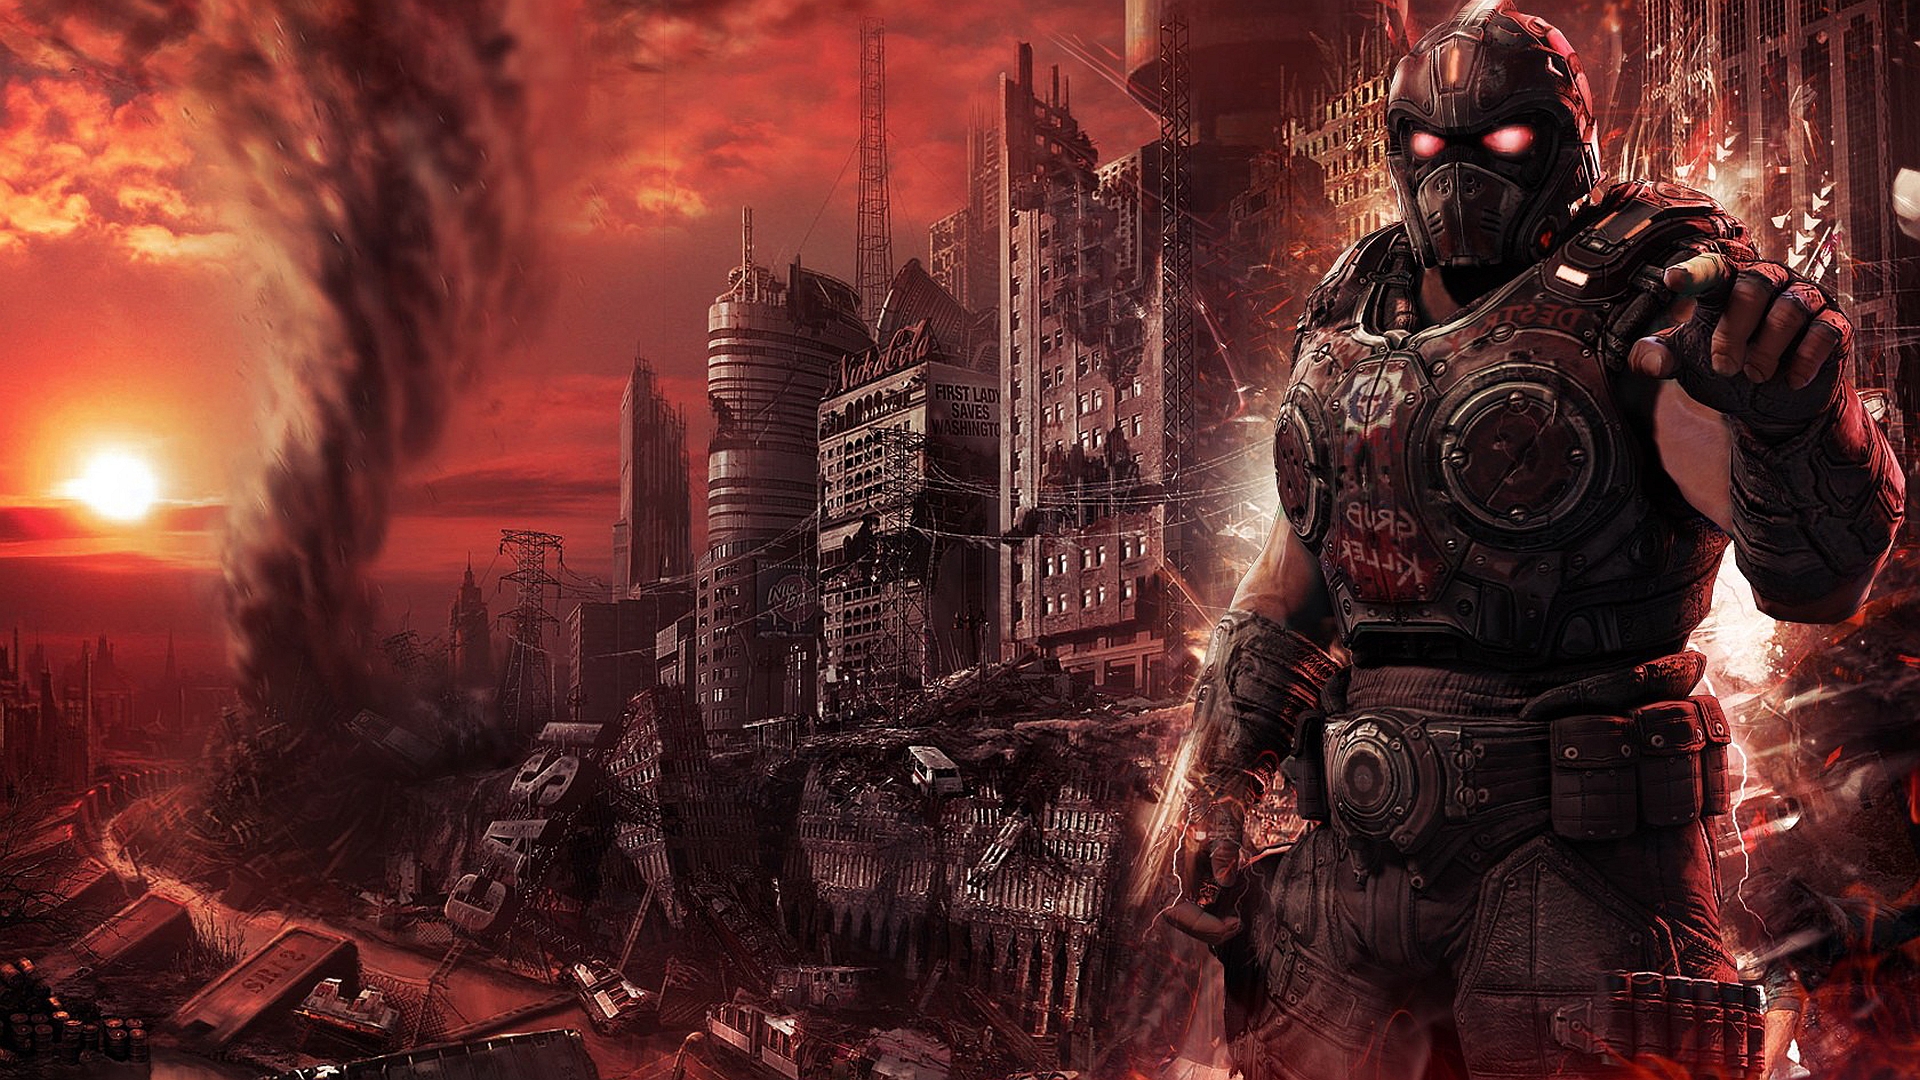 Fallout 4 Wallpapers, Pictures, Images